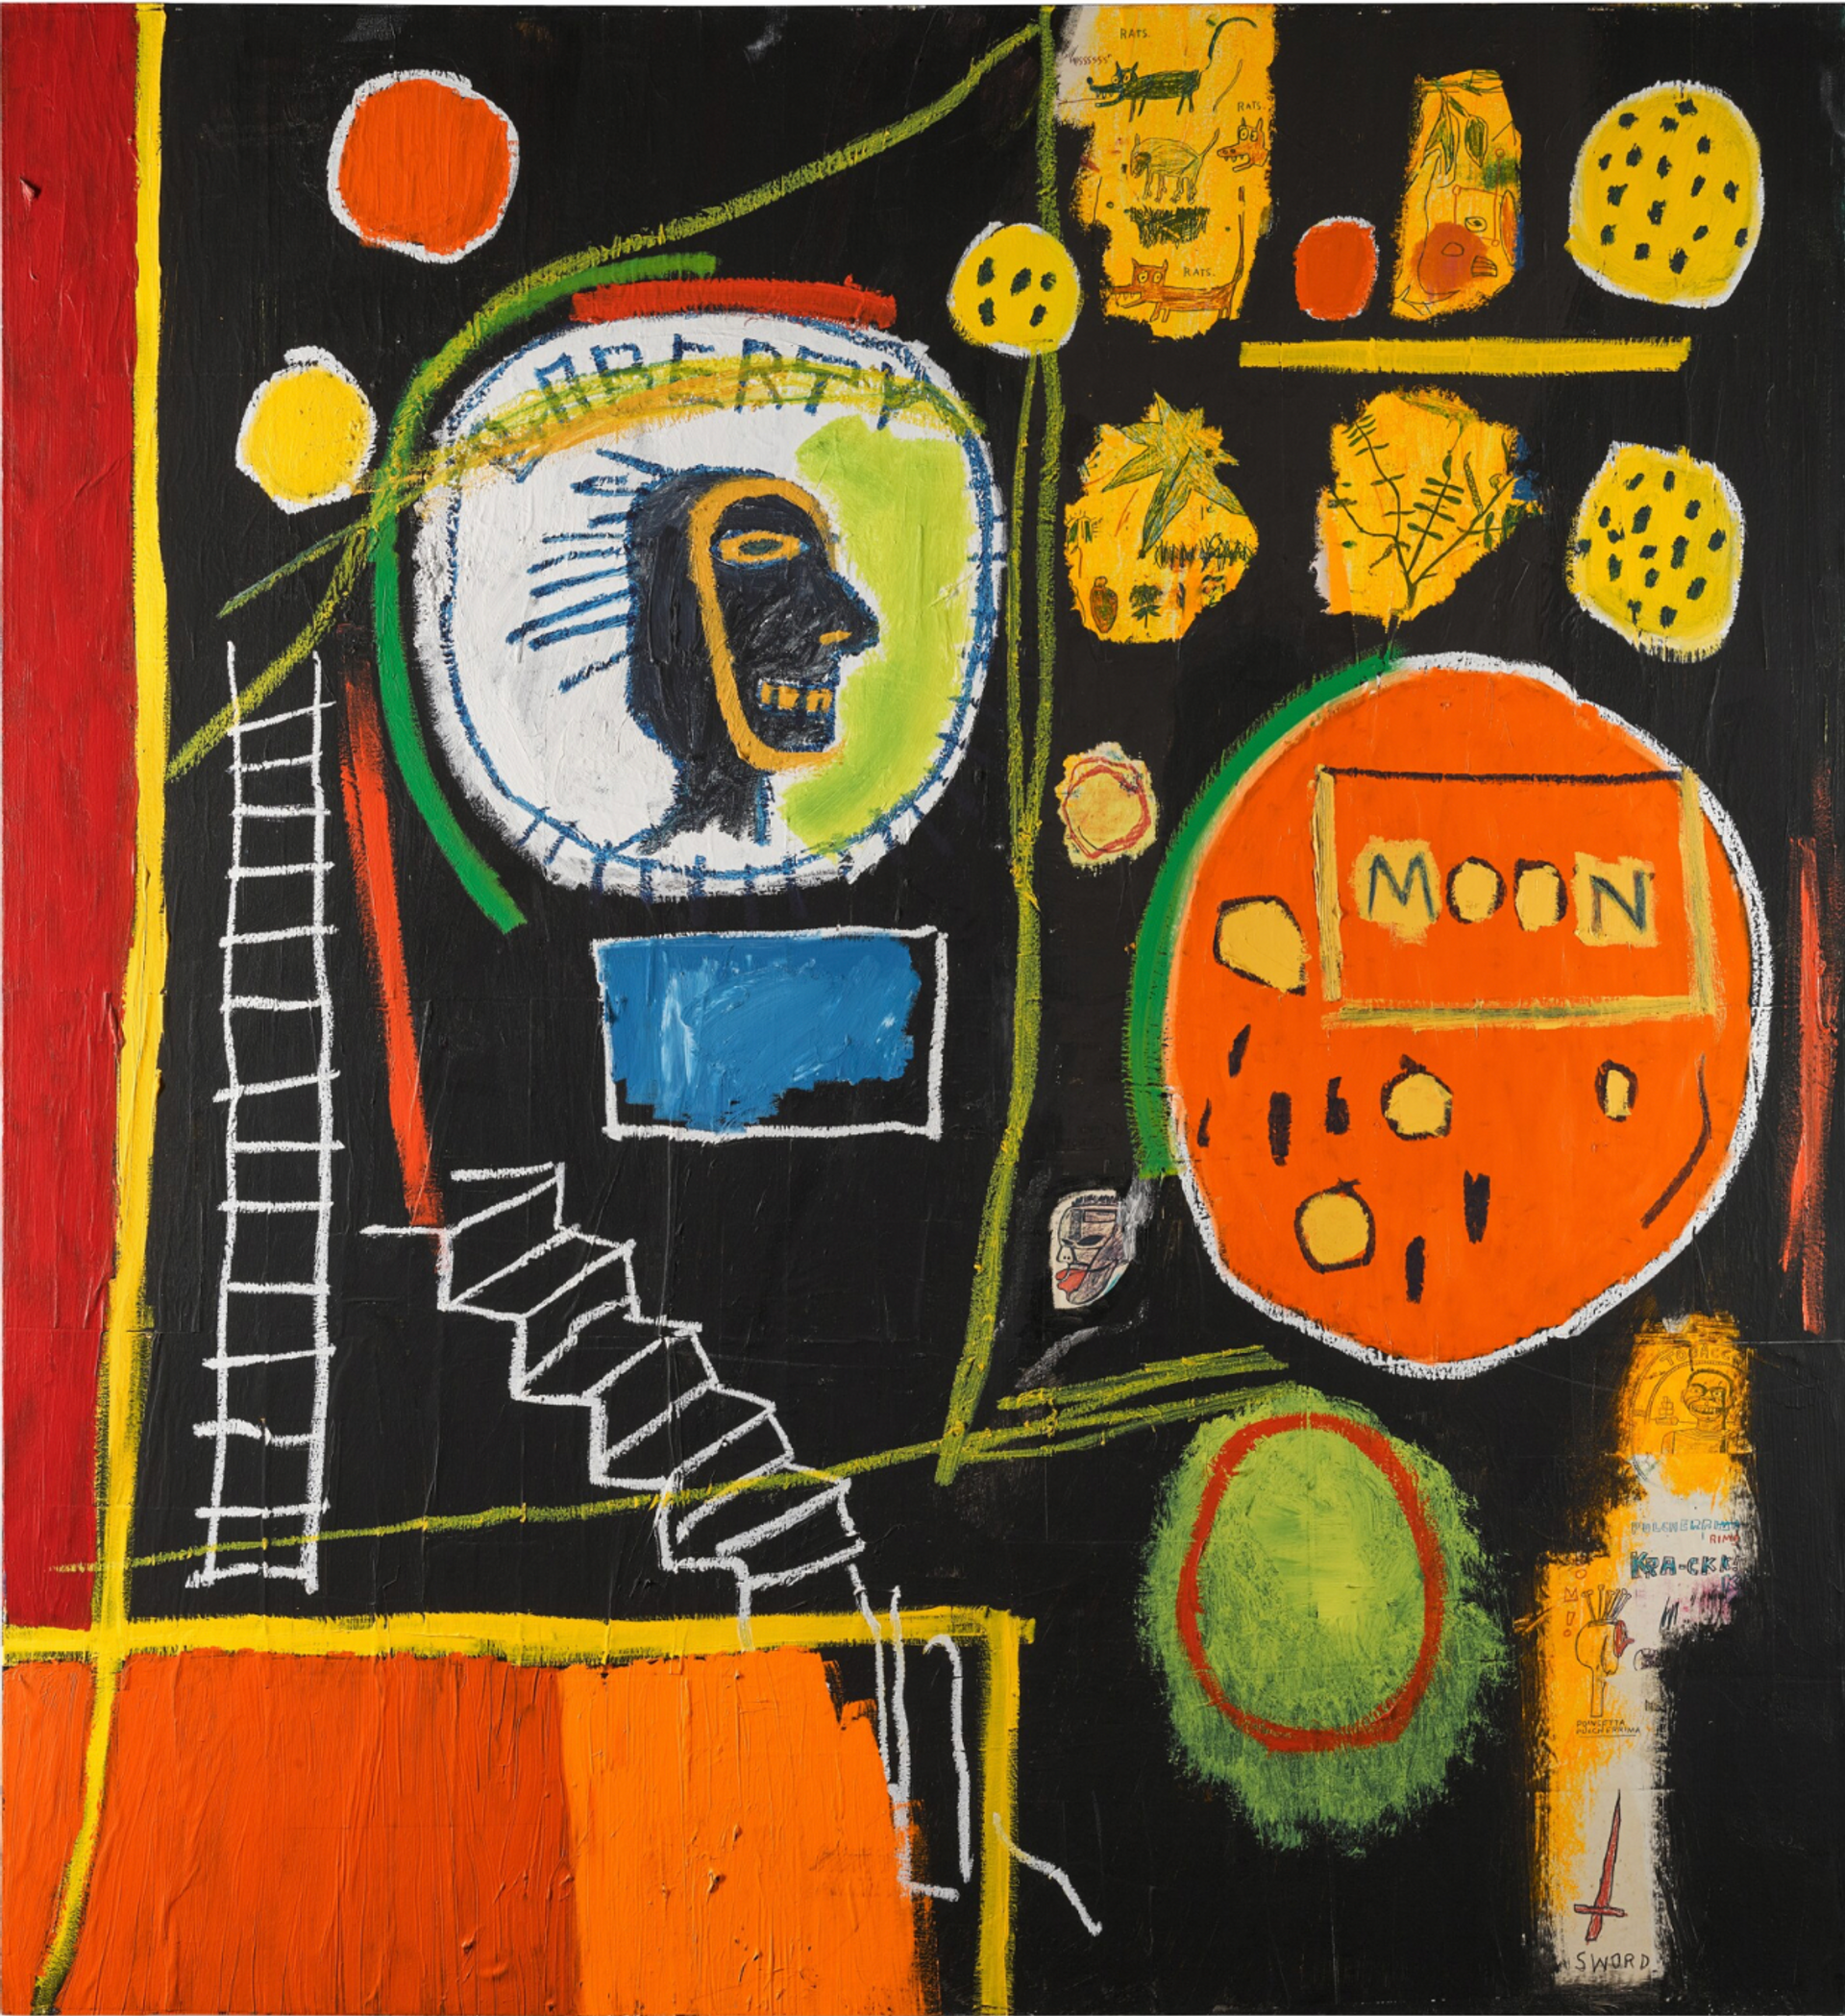 An abstract painting by Jean-Michel Basquiat featuring a vibrant background in shades of res, yellow, orange, and brown. Overlaid is a white outlined ladder, stairs, and several circles of varying sizes. The largest circle resembles a coin with a brown head and the word ‘liberty’ written above it. Another prominent circle is orange with smaller yellow circles inside, accompanied by the word ‘moon’ written in a rectangle.